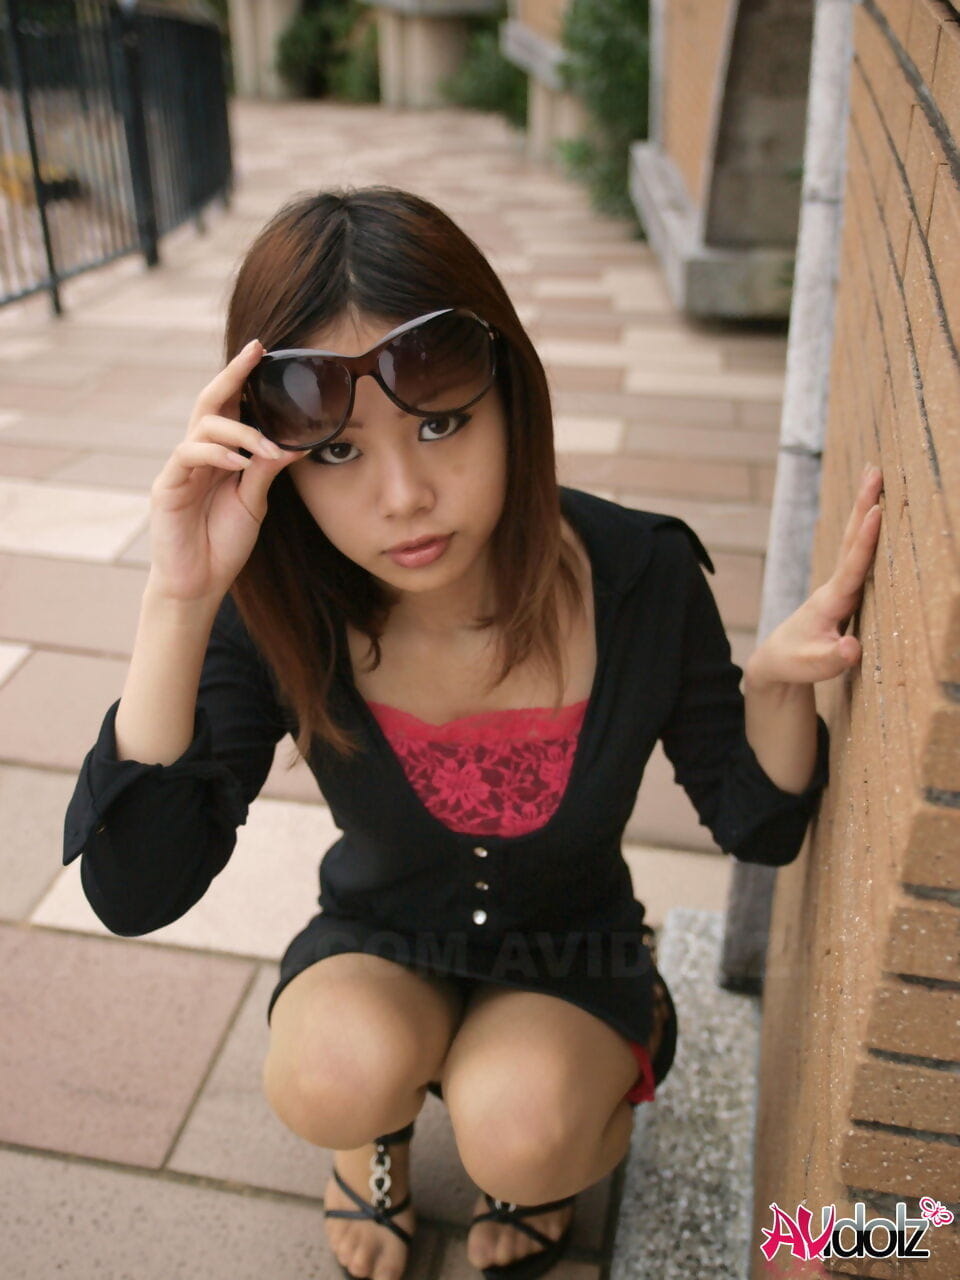 Fully clothed Japanese girl lifts up sunglasses to show her pretty face page 1